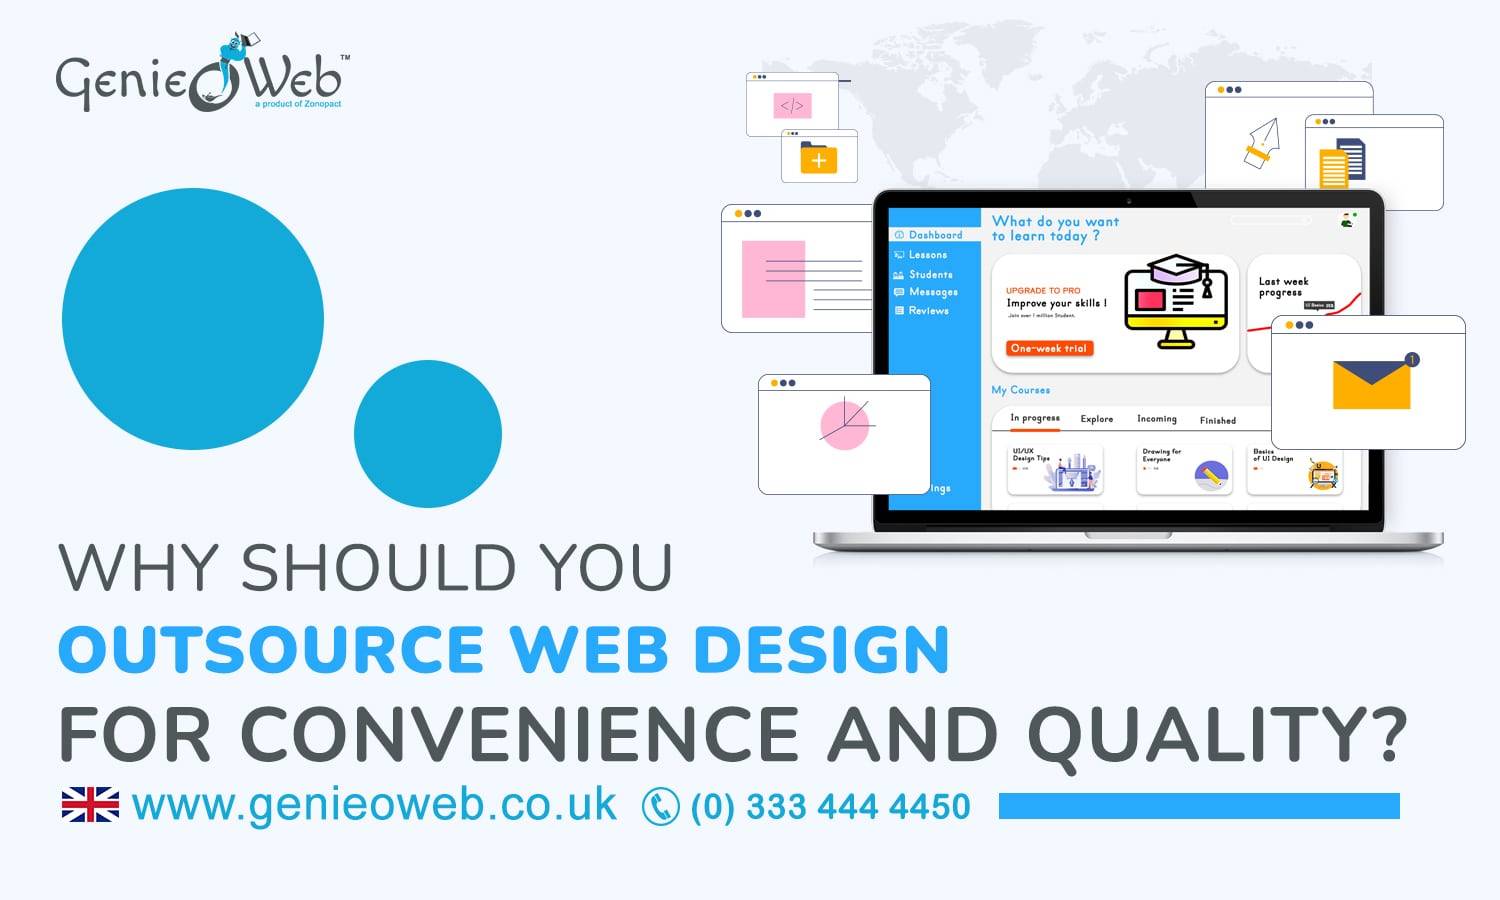 Why should you outsource web design for convenience and quality